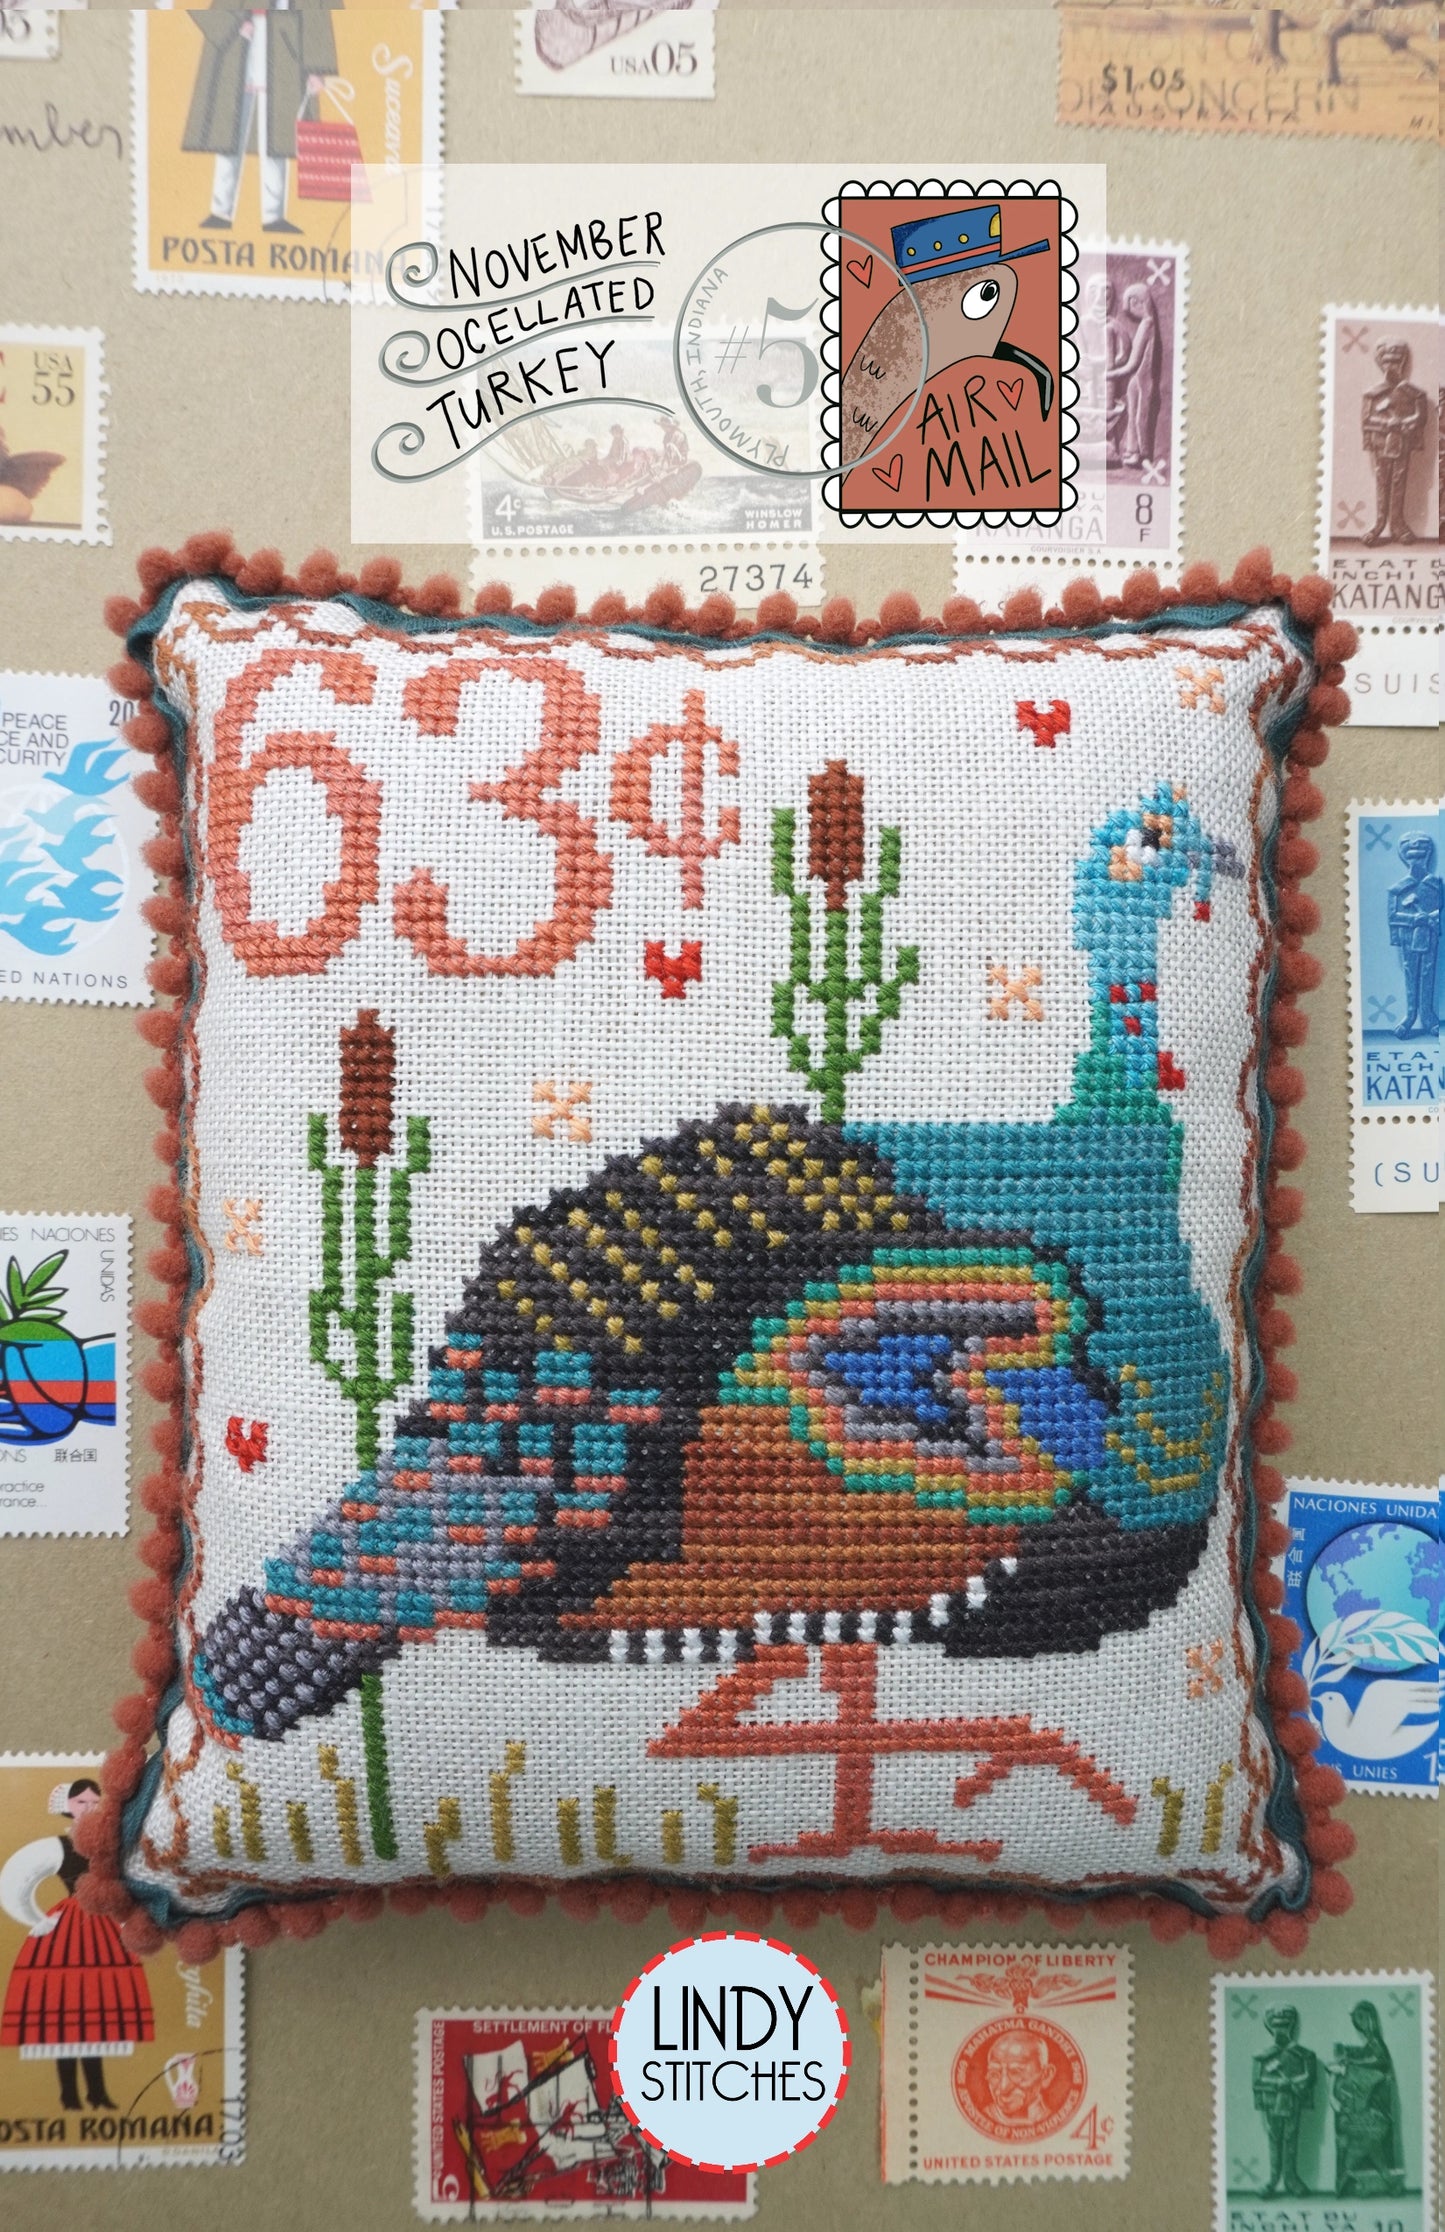 Air Mail November #5 Ocellated Turkey Cross Stitch Pattern by Lindy Stitches